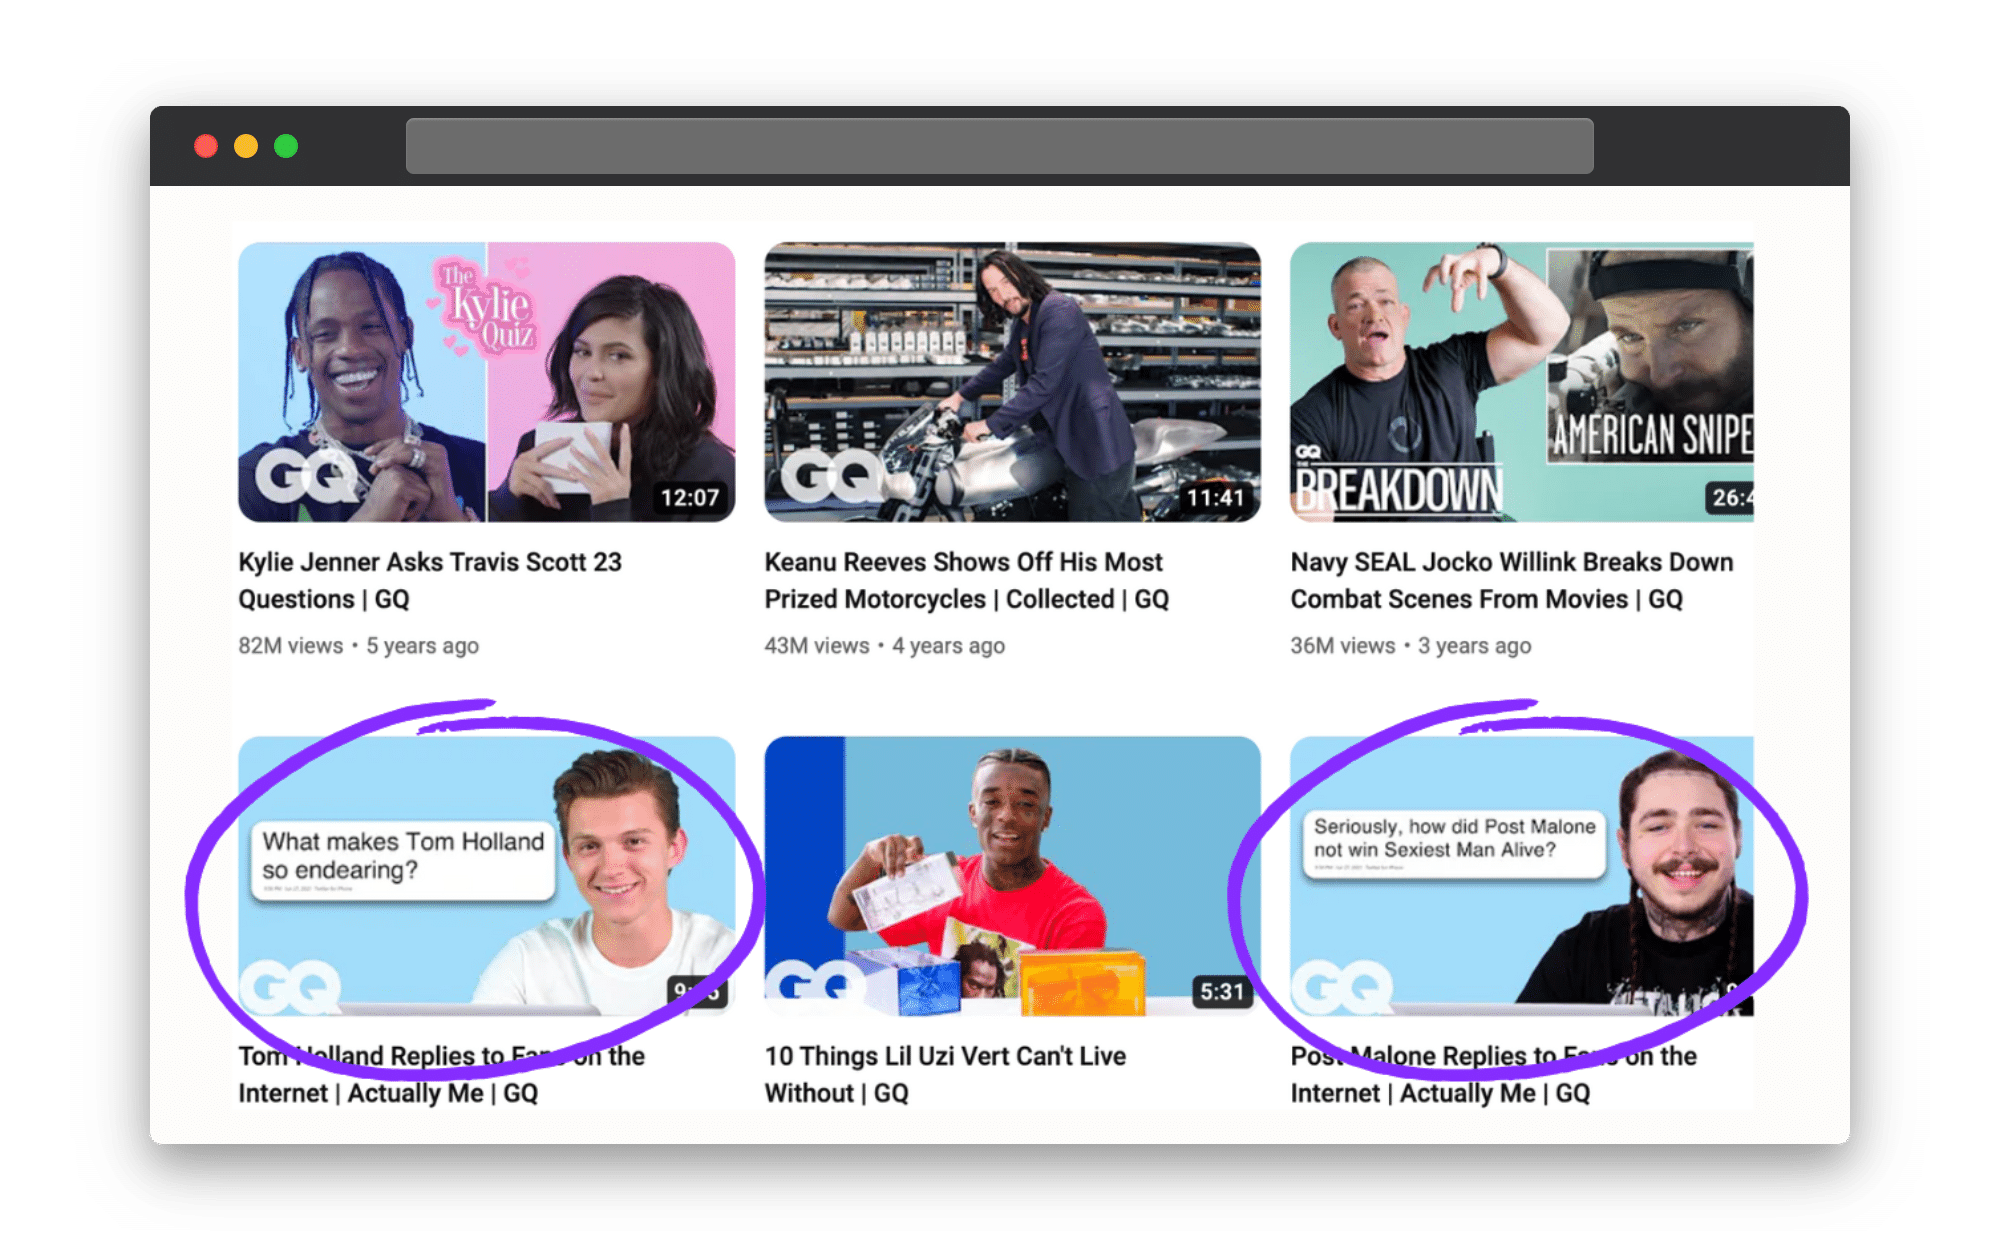 The circled images show how the branding on the GQ channel differs, telling viewers they're a part of a series.